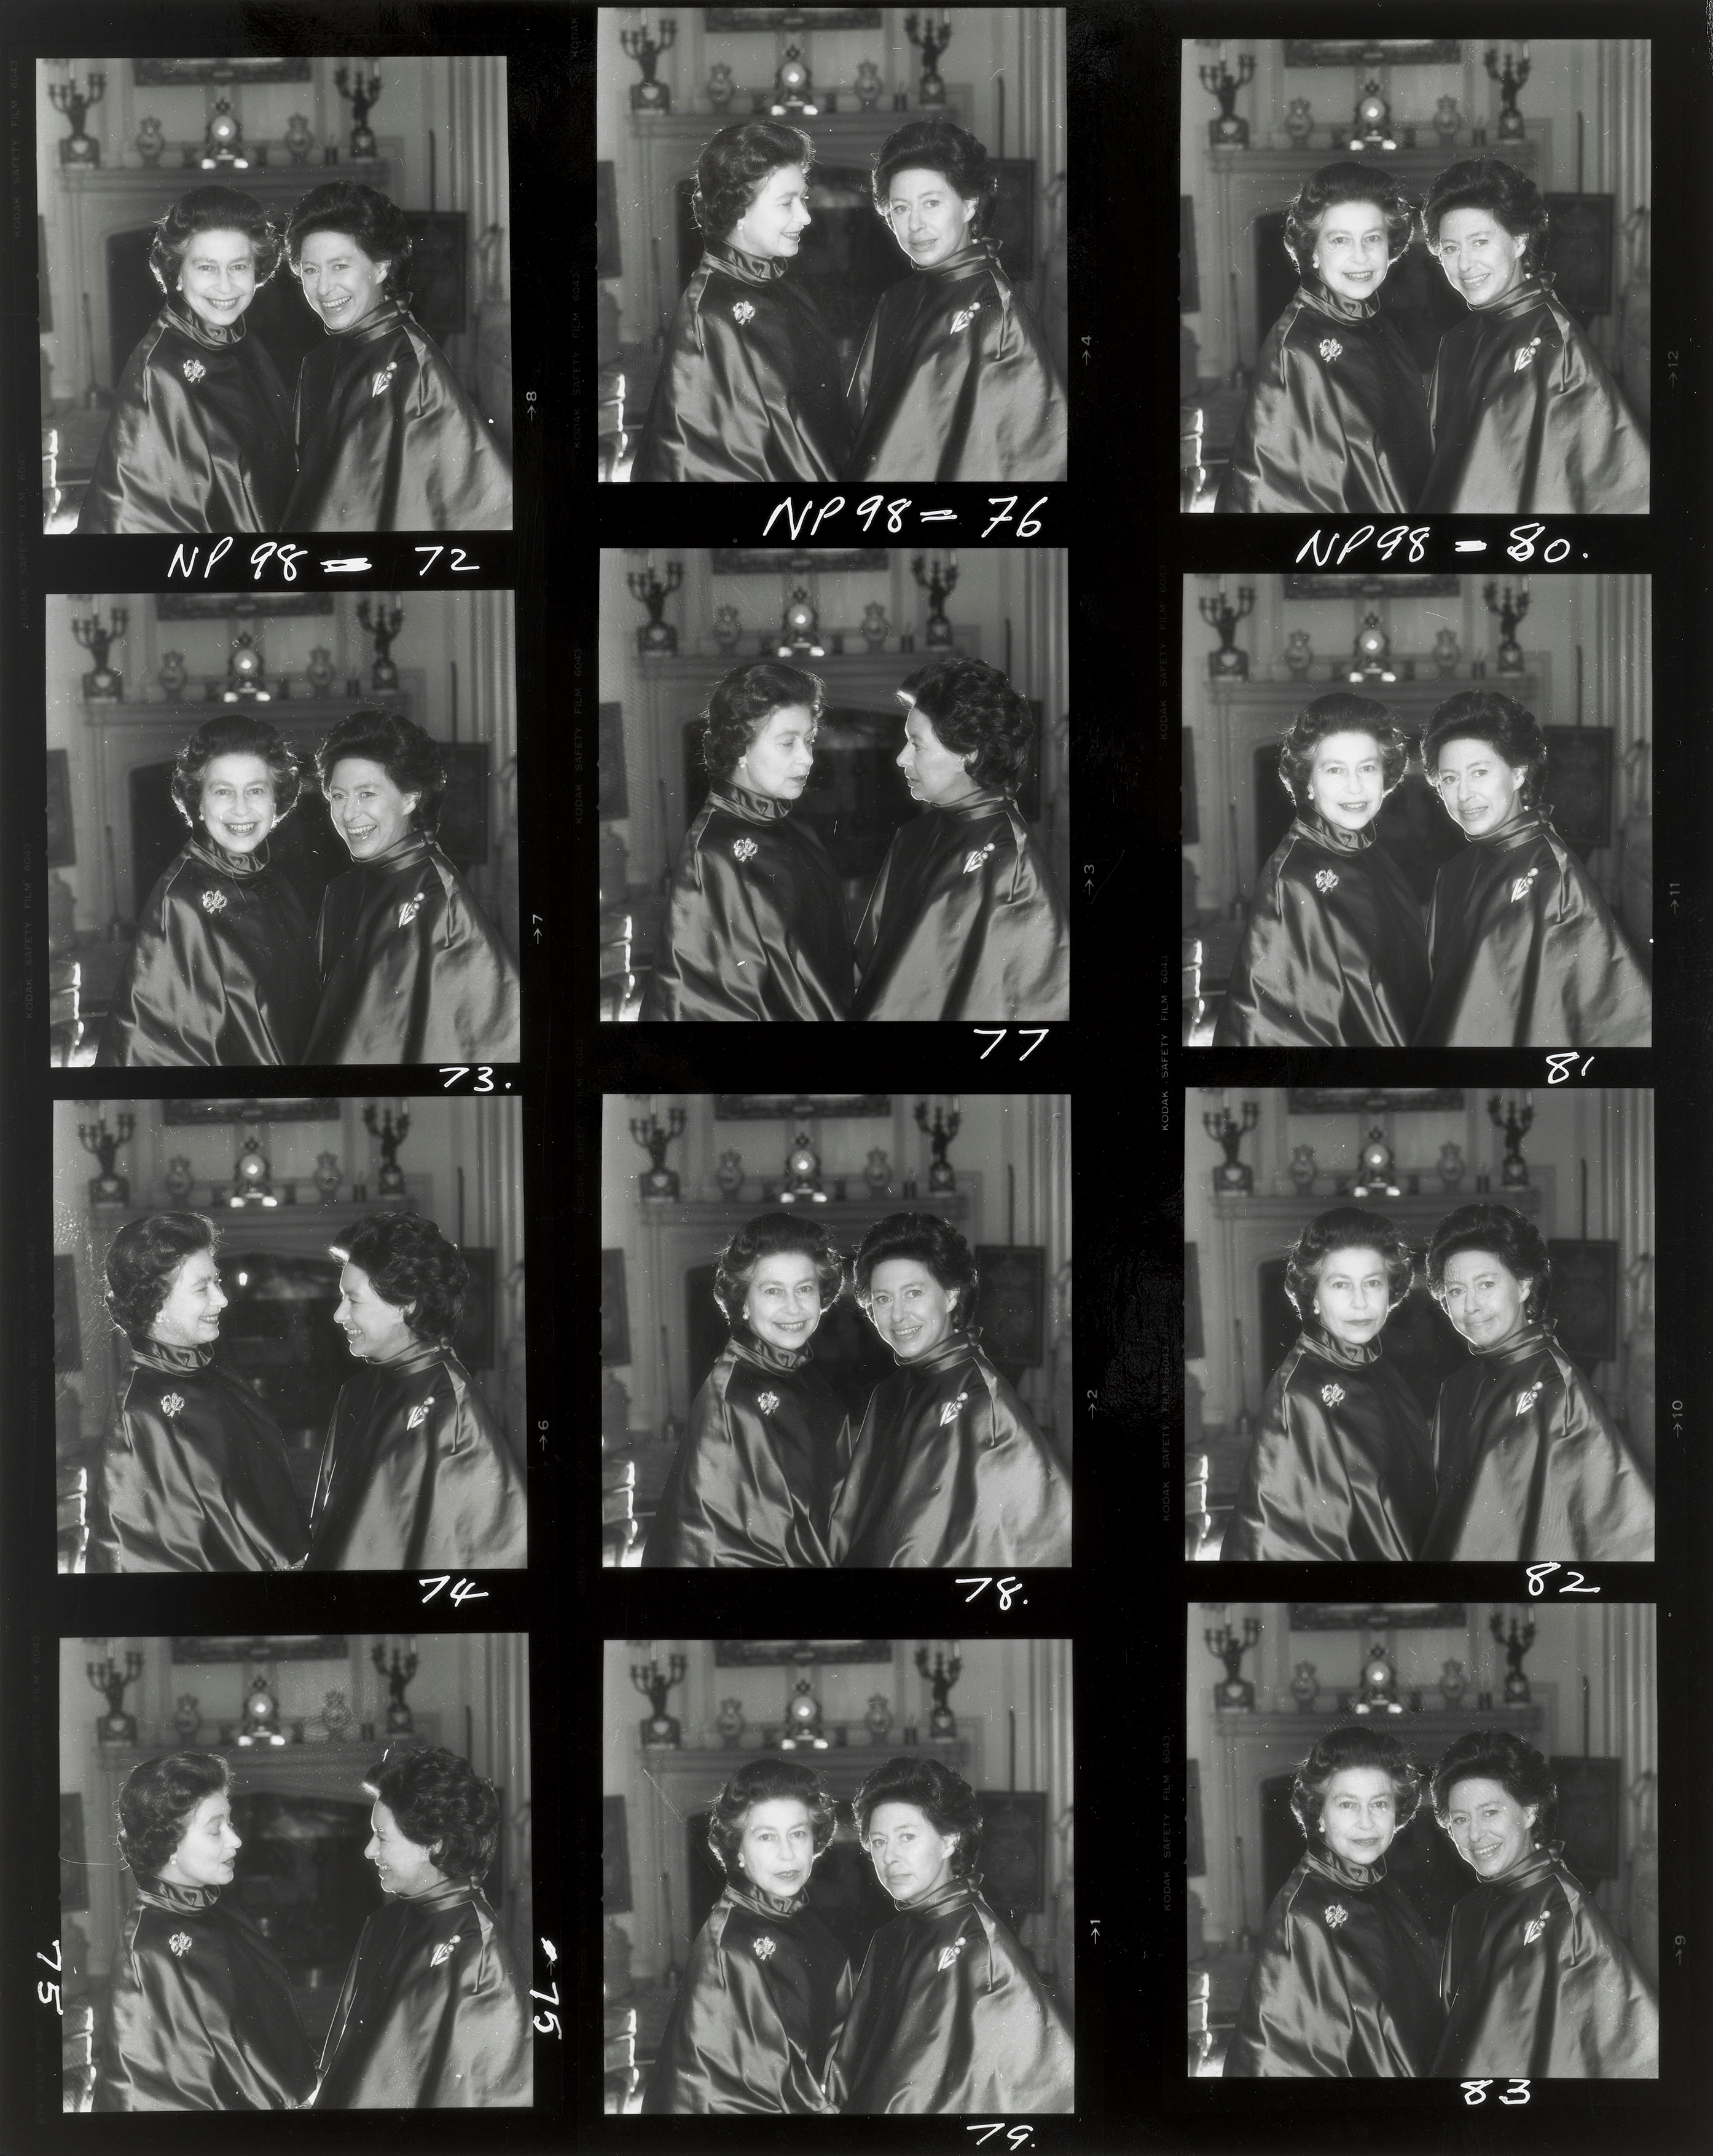 This contact sheet shows Queen Elizabeth II and Princess Margaret laughing and talking together during a shoot